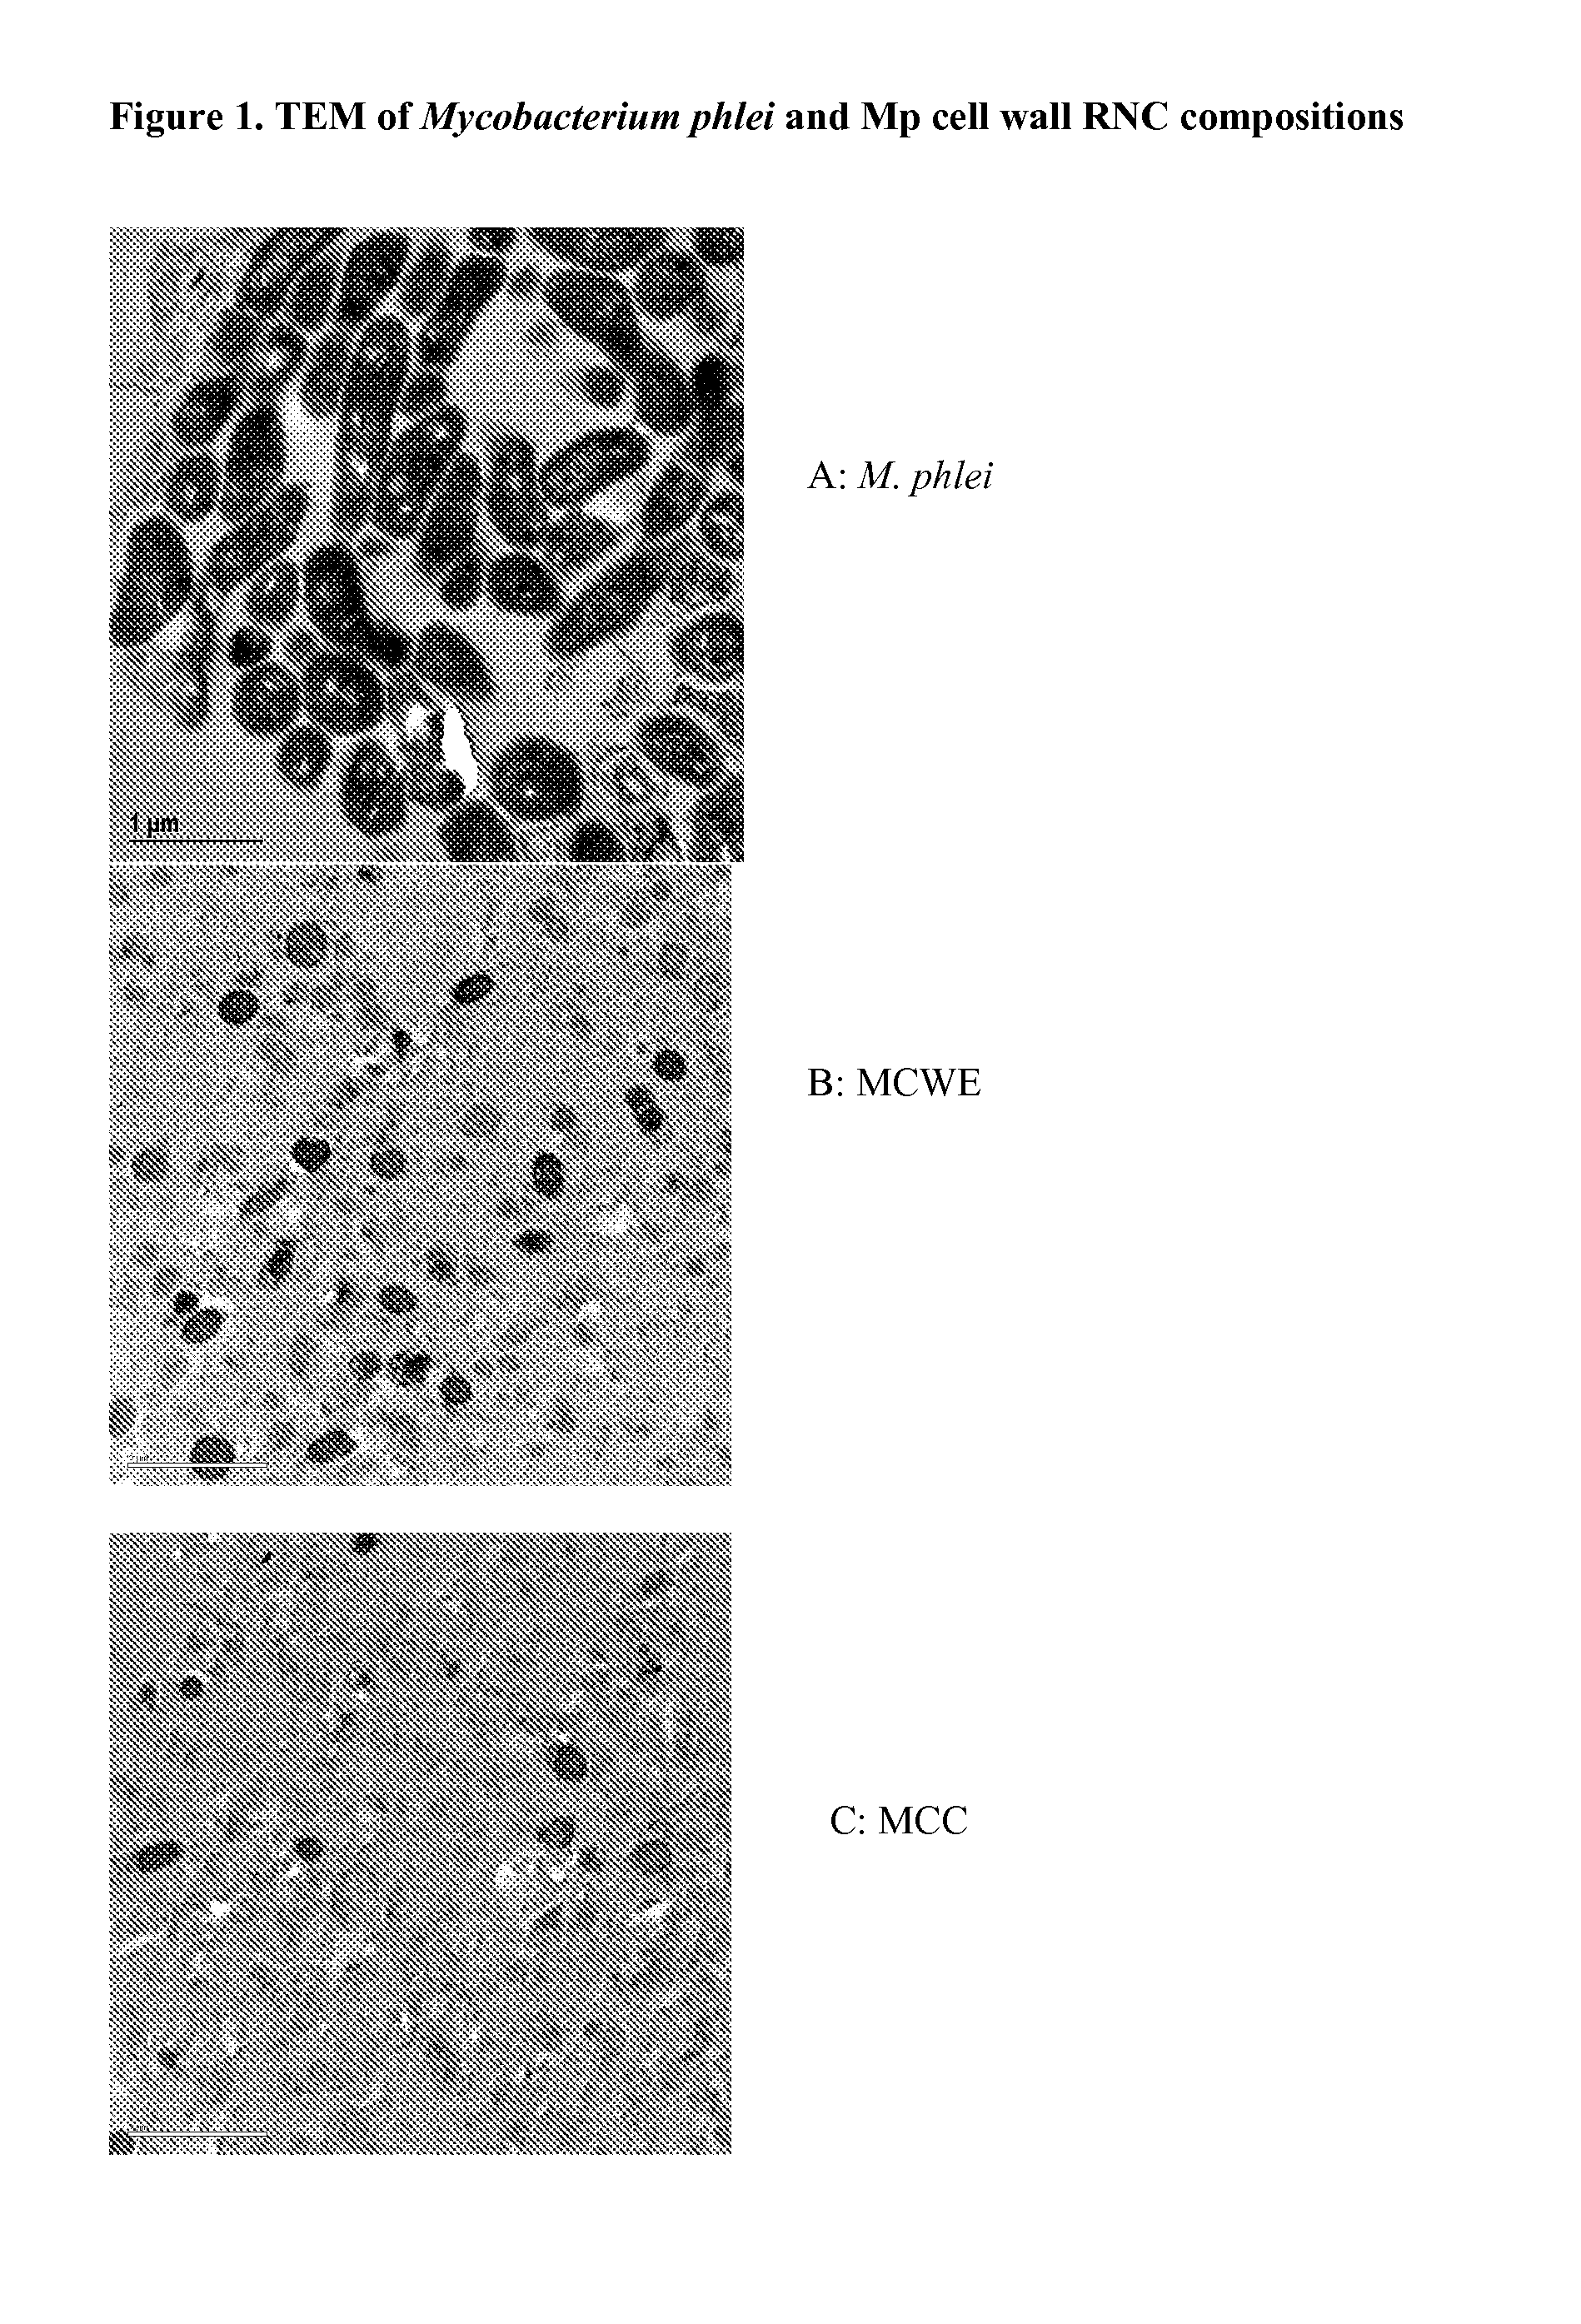 Bacterial ribonucleic acid cell wall compositions and methods of making and using them